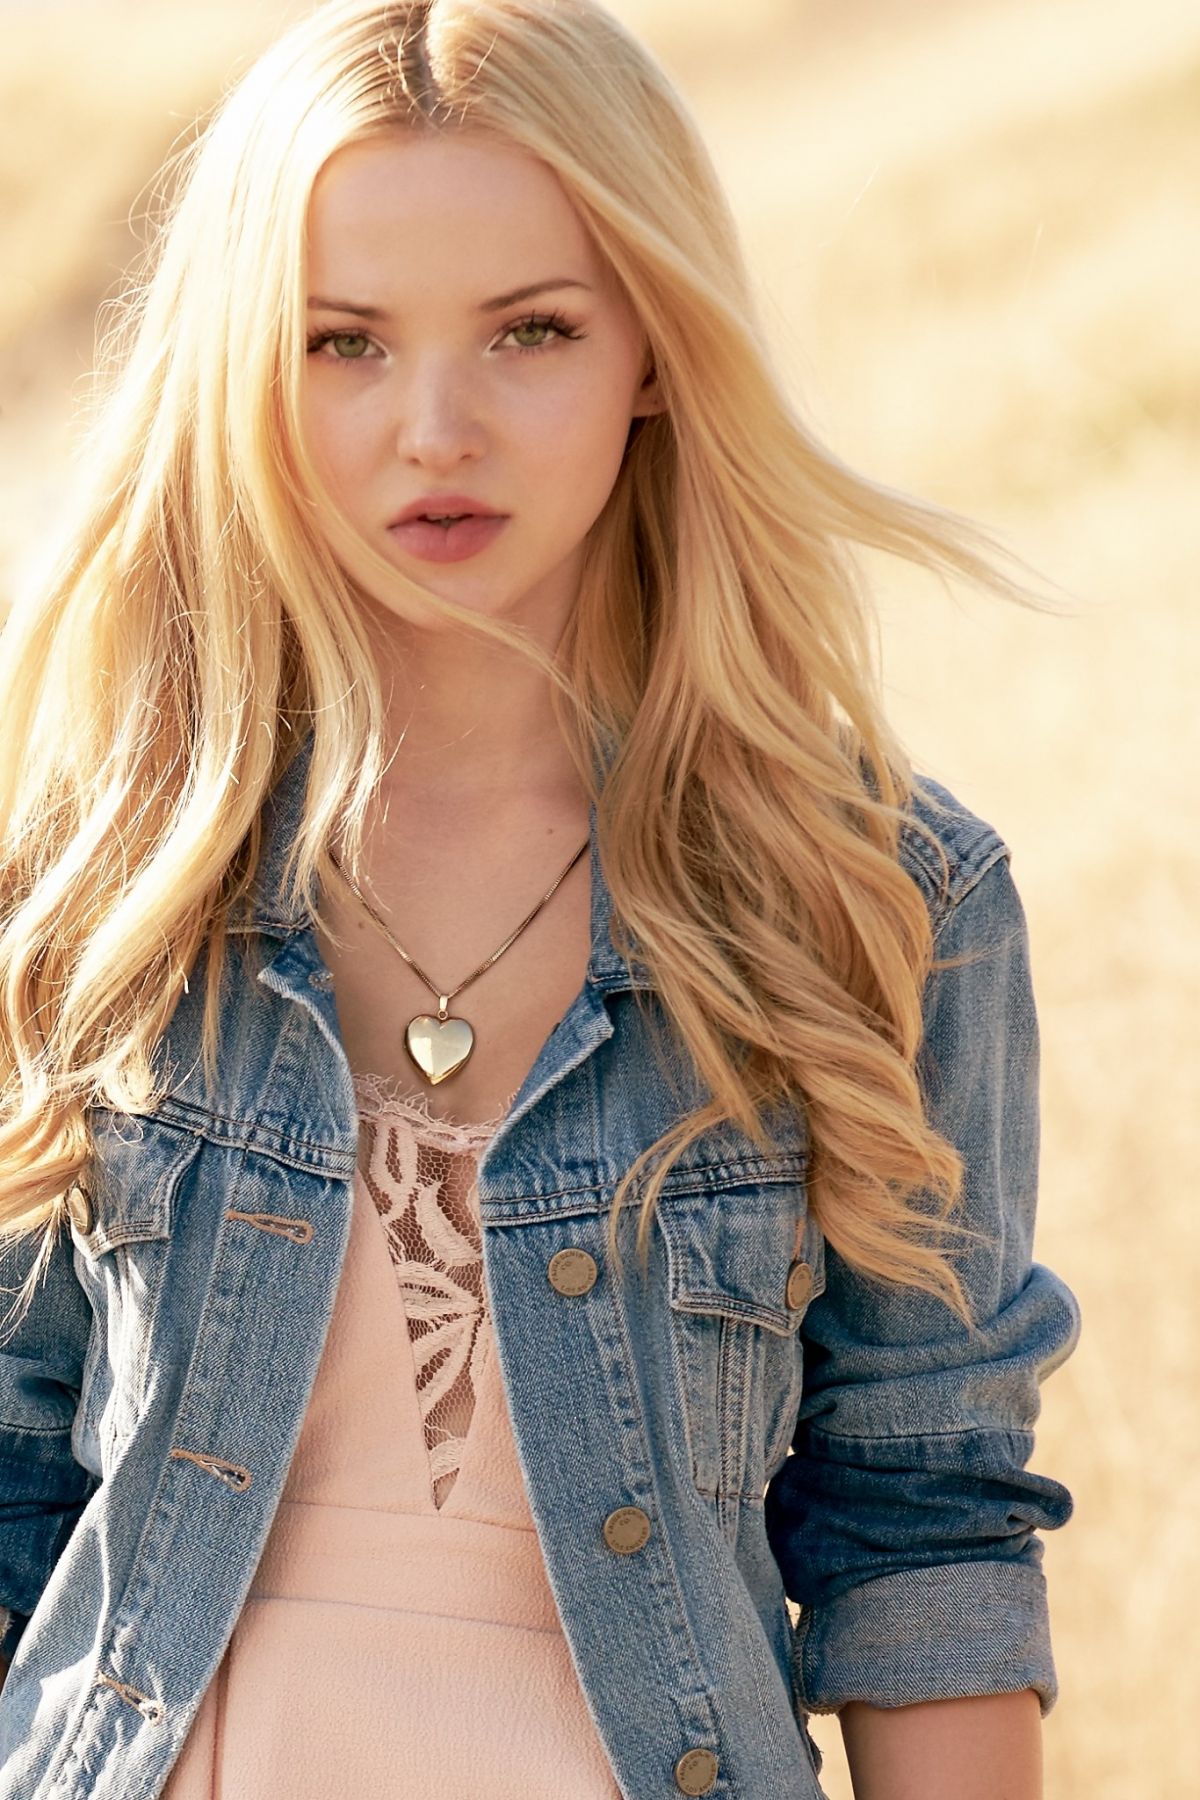 dove-cameron-the-girl-and-the-dreamcatcher-photoshoot-by-paul-smith_1.jpg